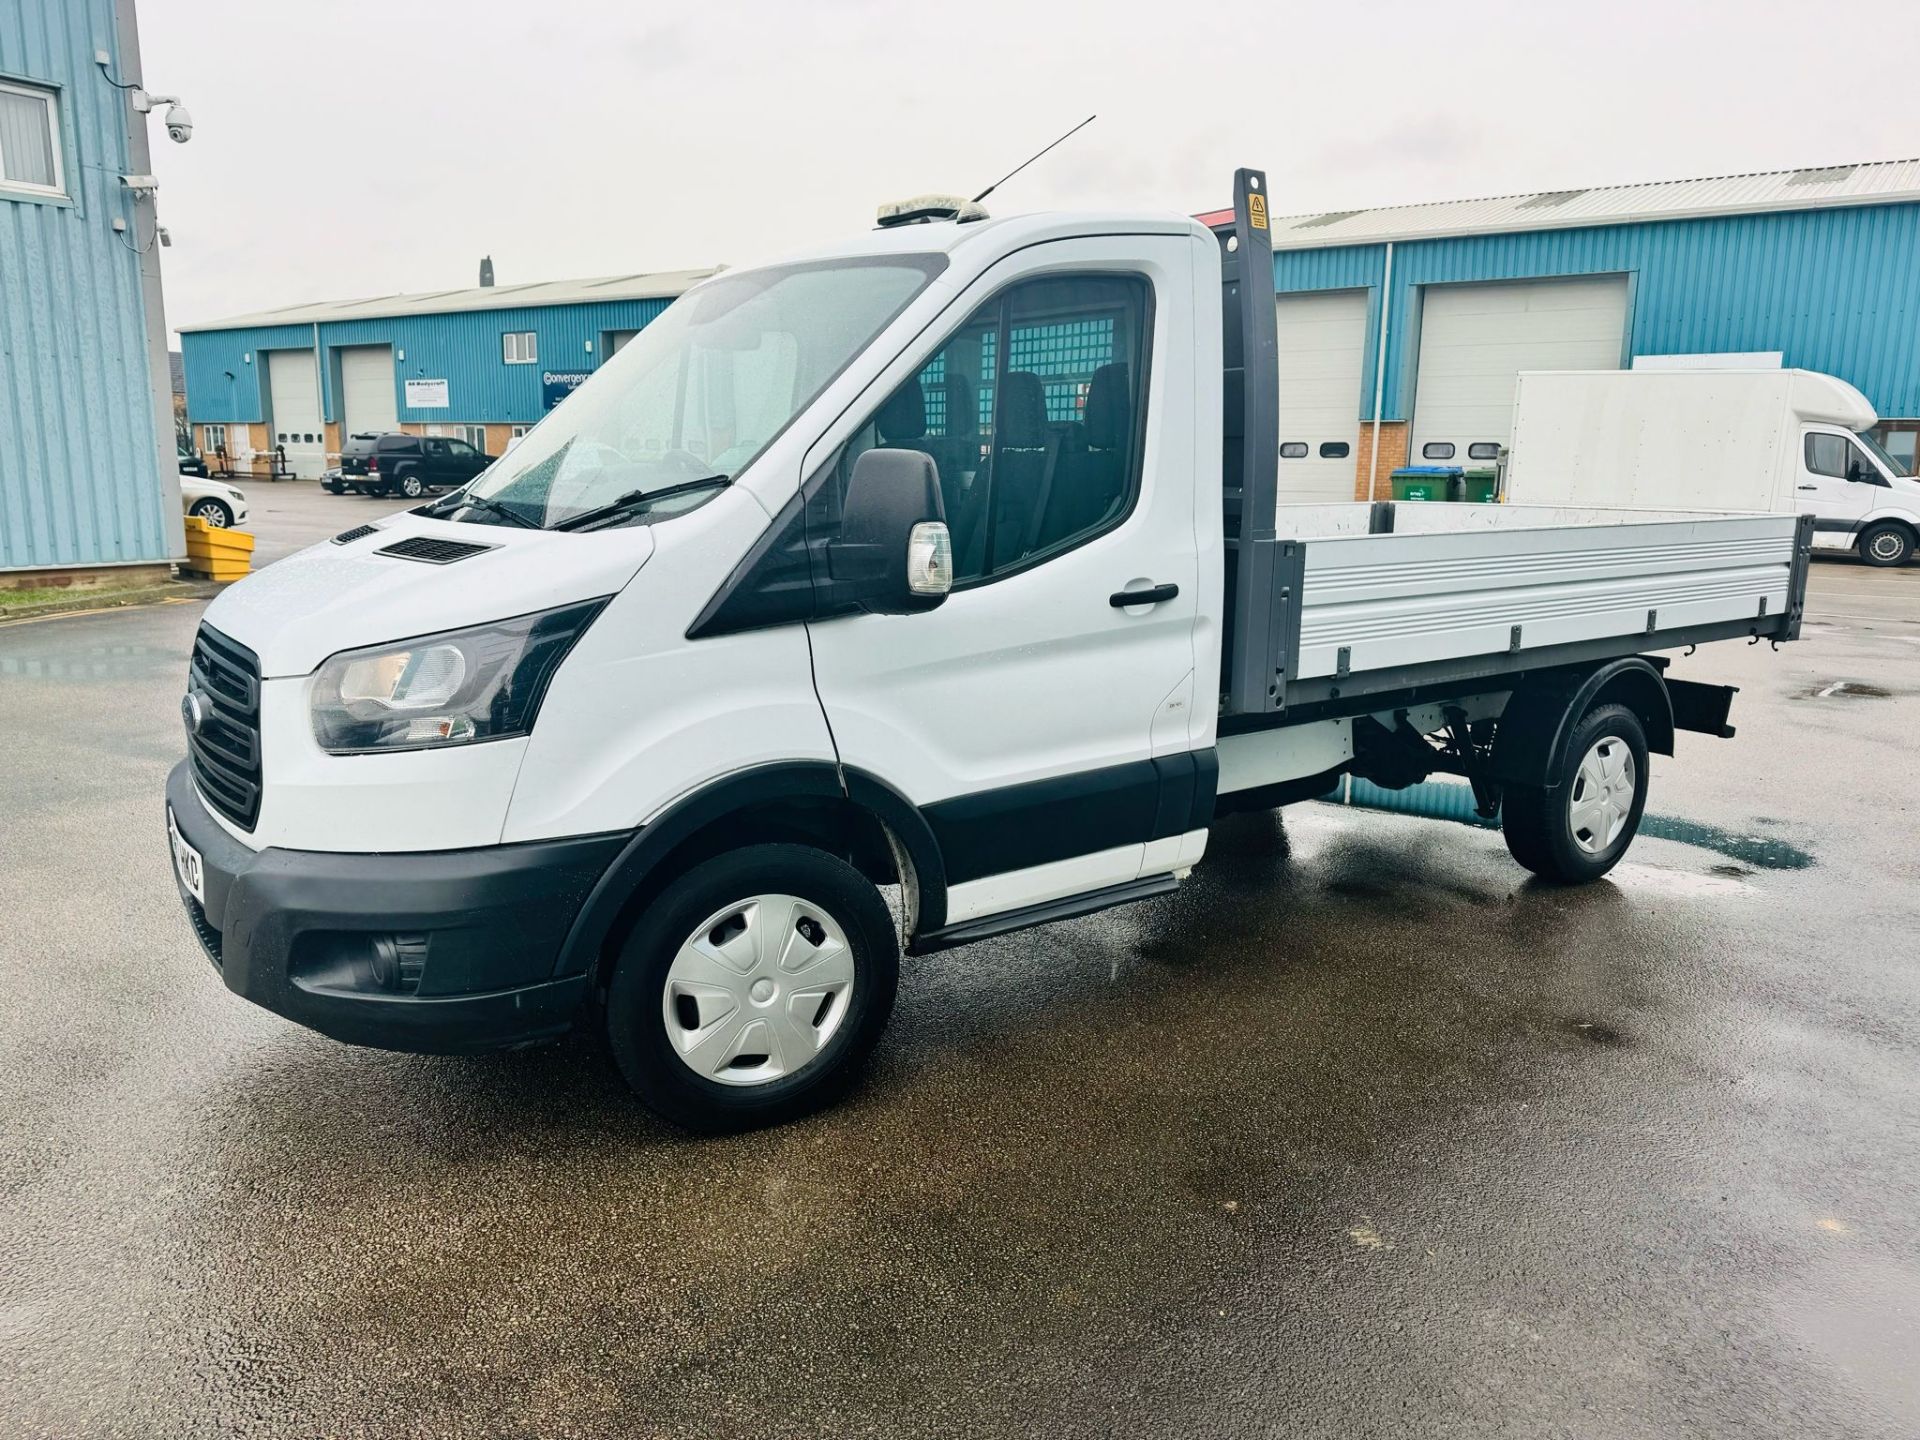 FORD TRANSIT 2.0 TIPPER130ps 'One Stop' Tipper - Manual - Diesel - 2.0 - Tipper Body 94.6k miles - Image 3 of 7